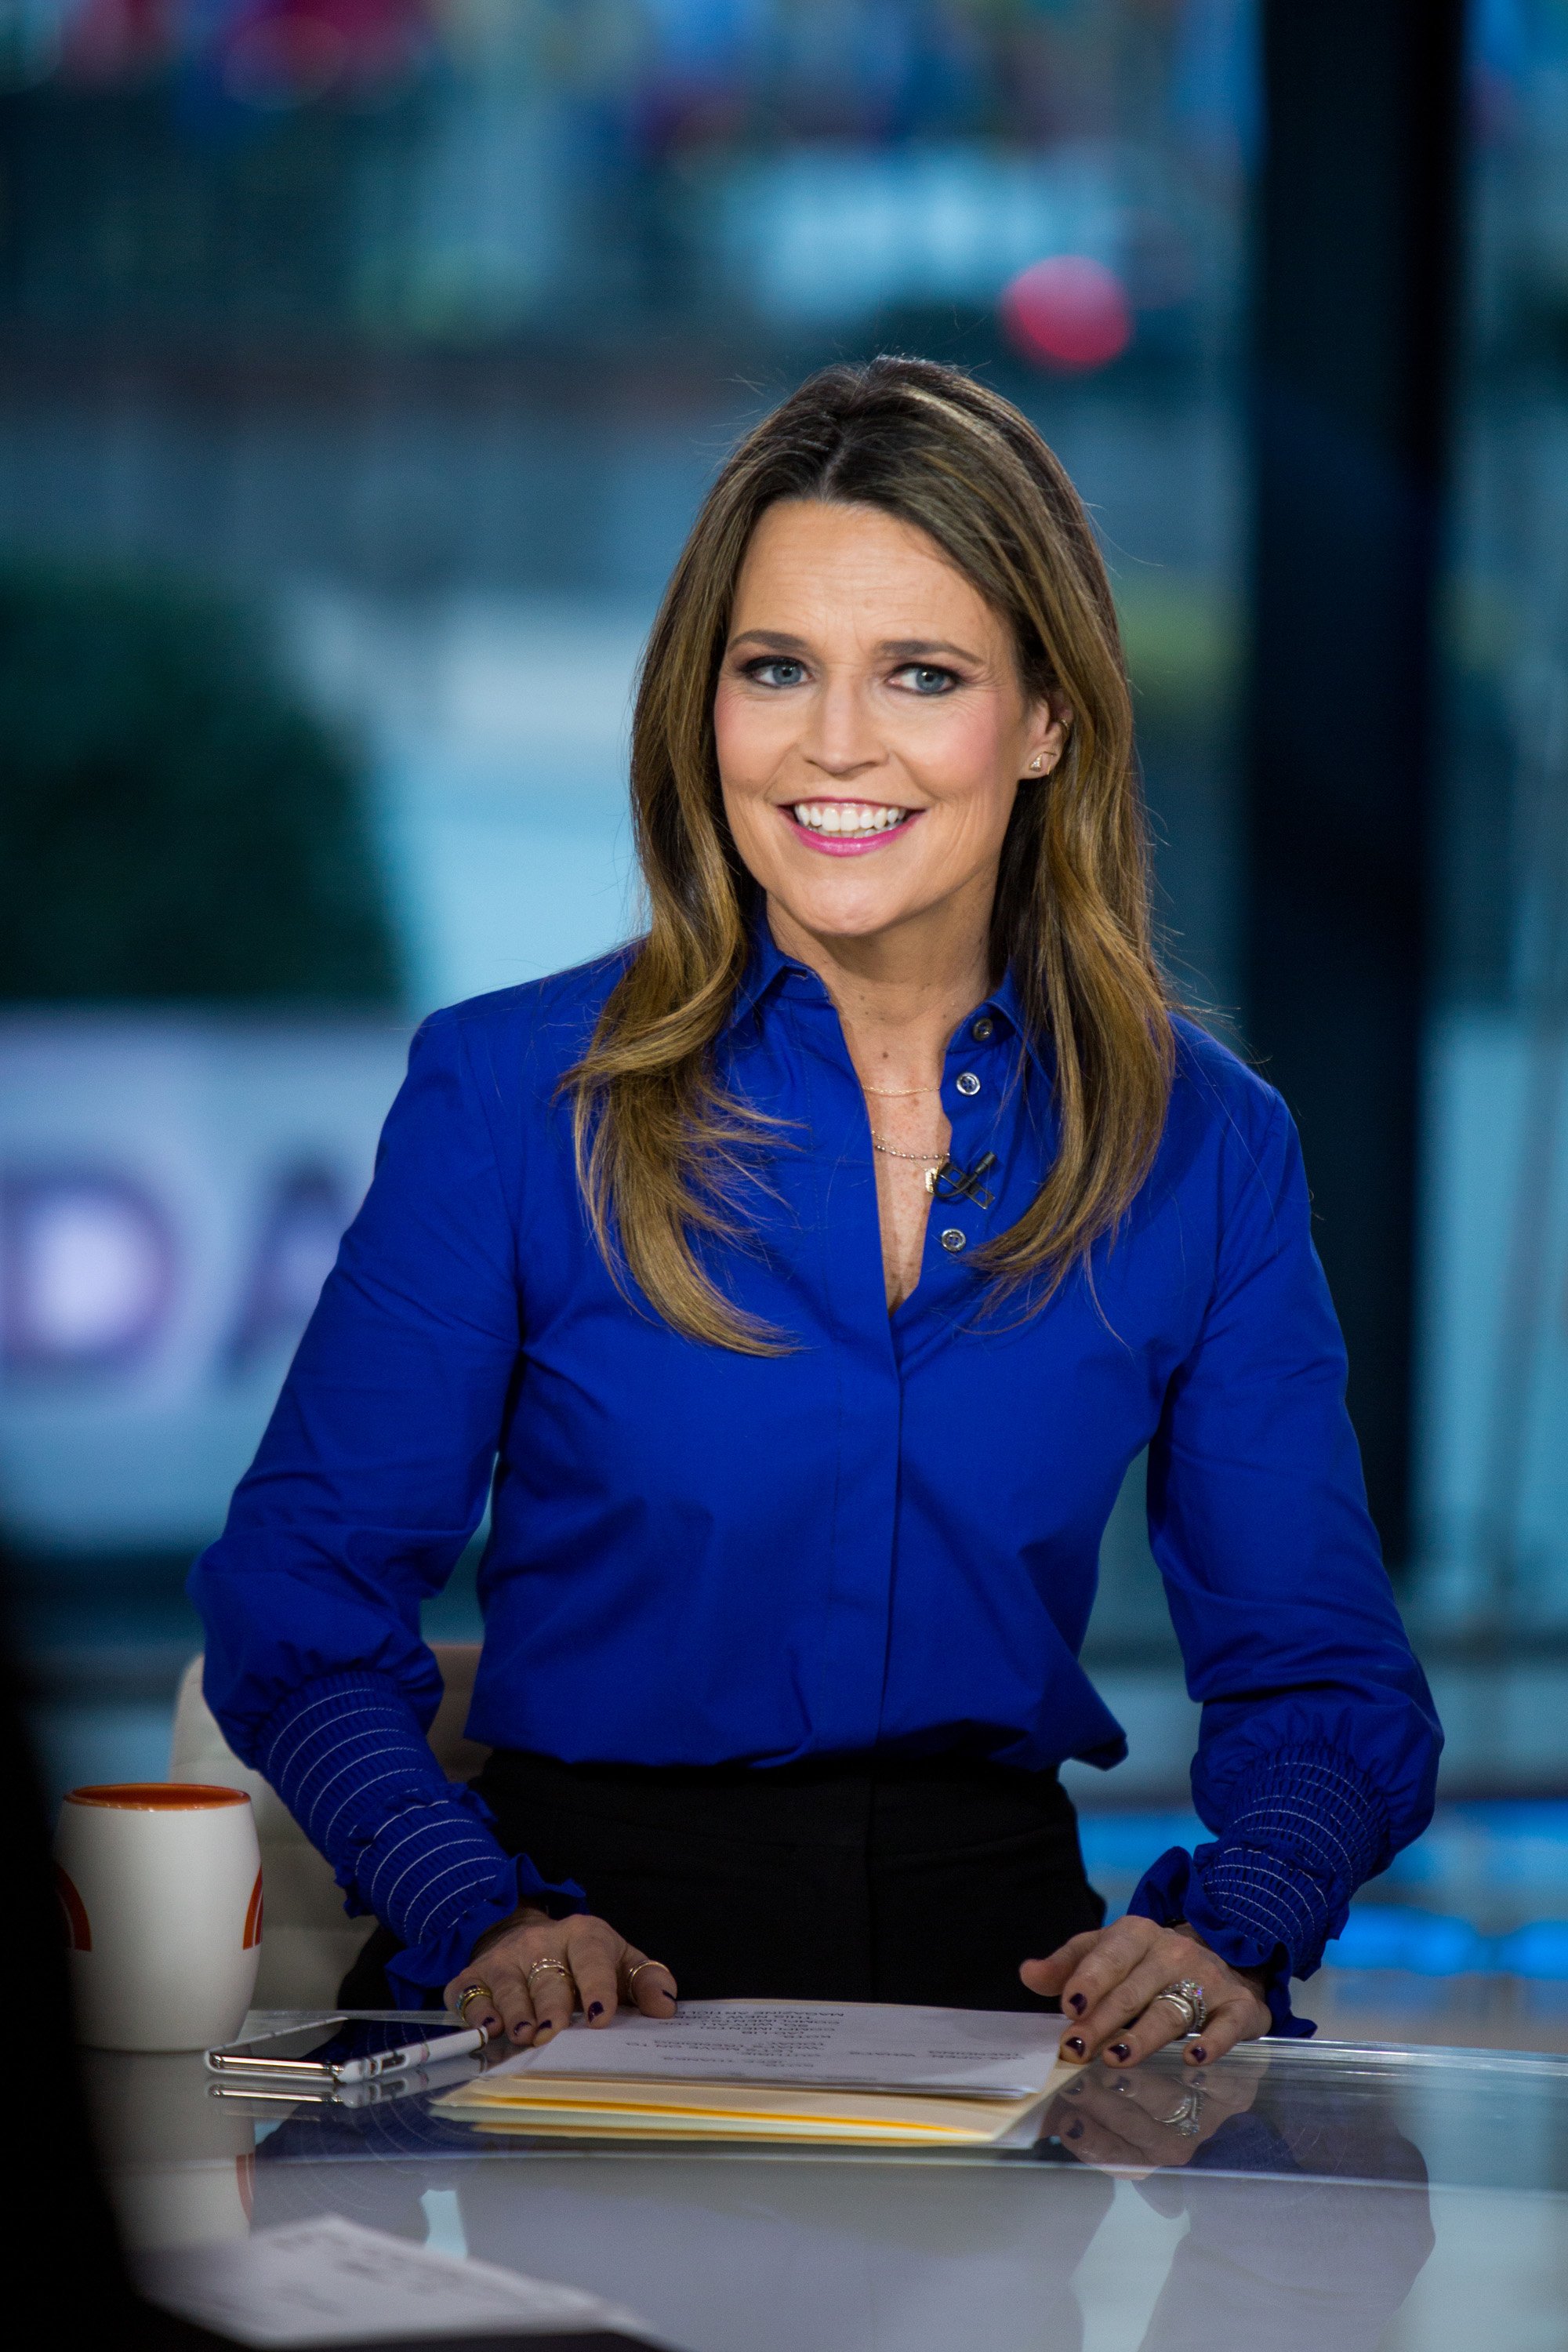 Savannah Guthrie pictured on the "Today Show" on Thursday, Jan. 18, 2018. | Source: Getty Images.